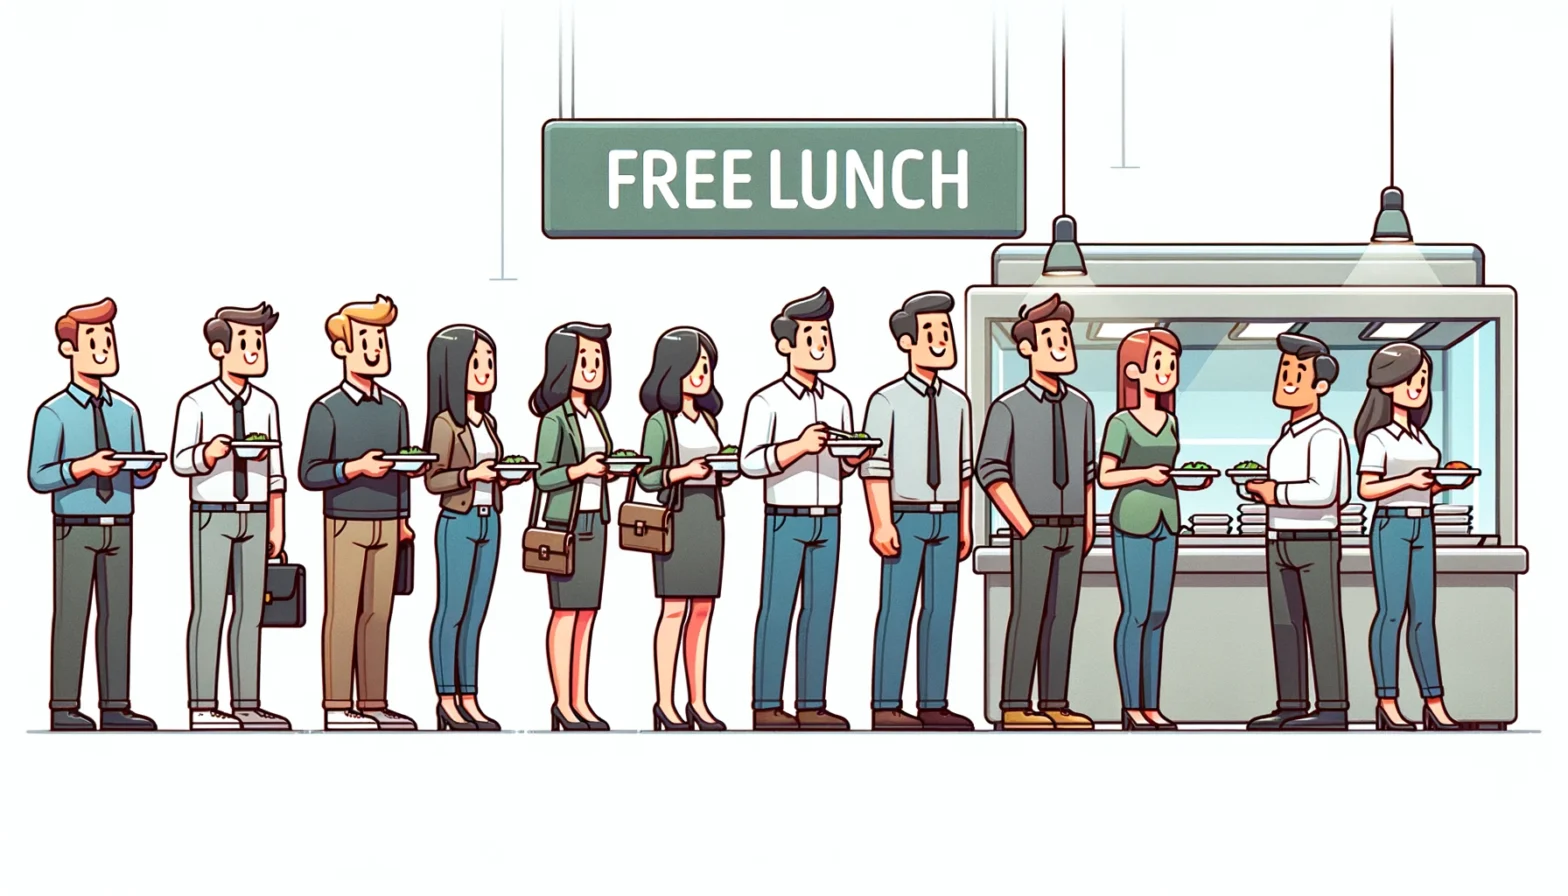 More than 40% of workers would return to the office for free food amidst cost-of-living crisis